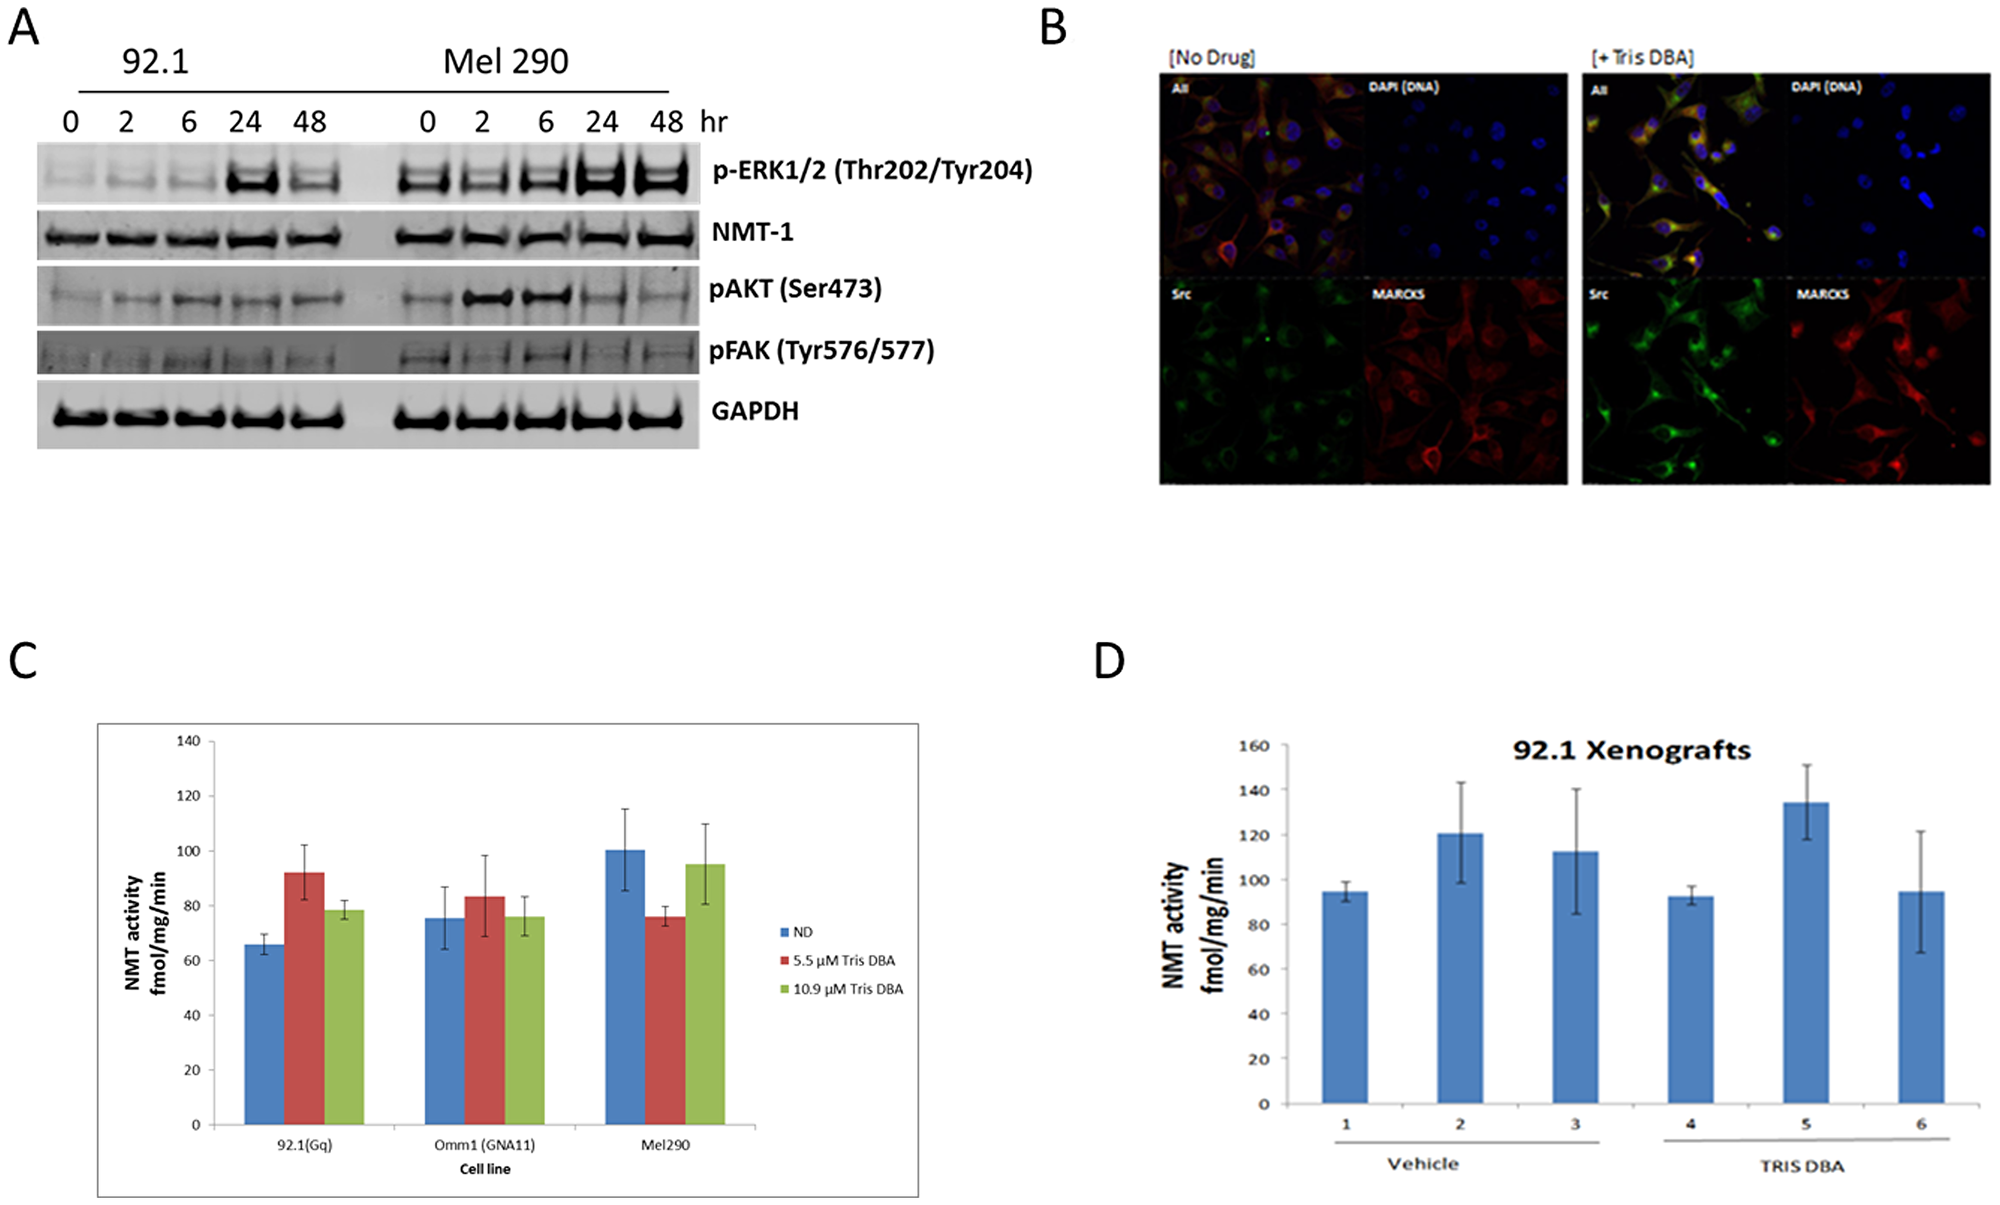 Tris DBA inhibits uveal melanoma tumor growth independent of NMT1.